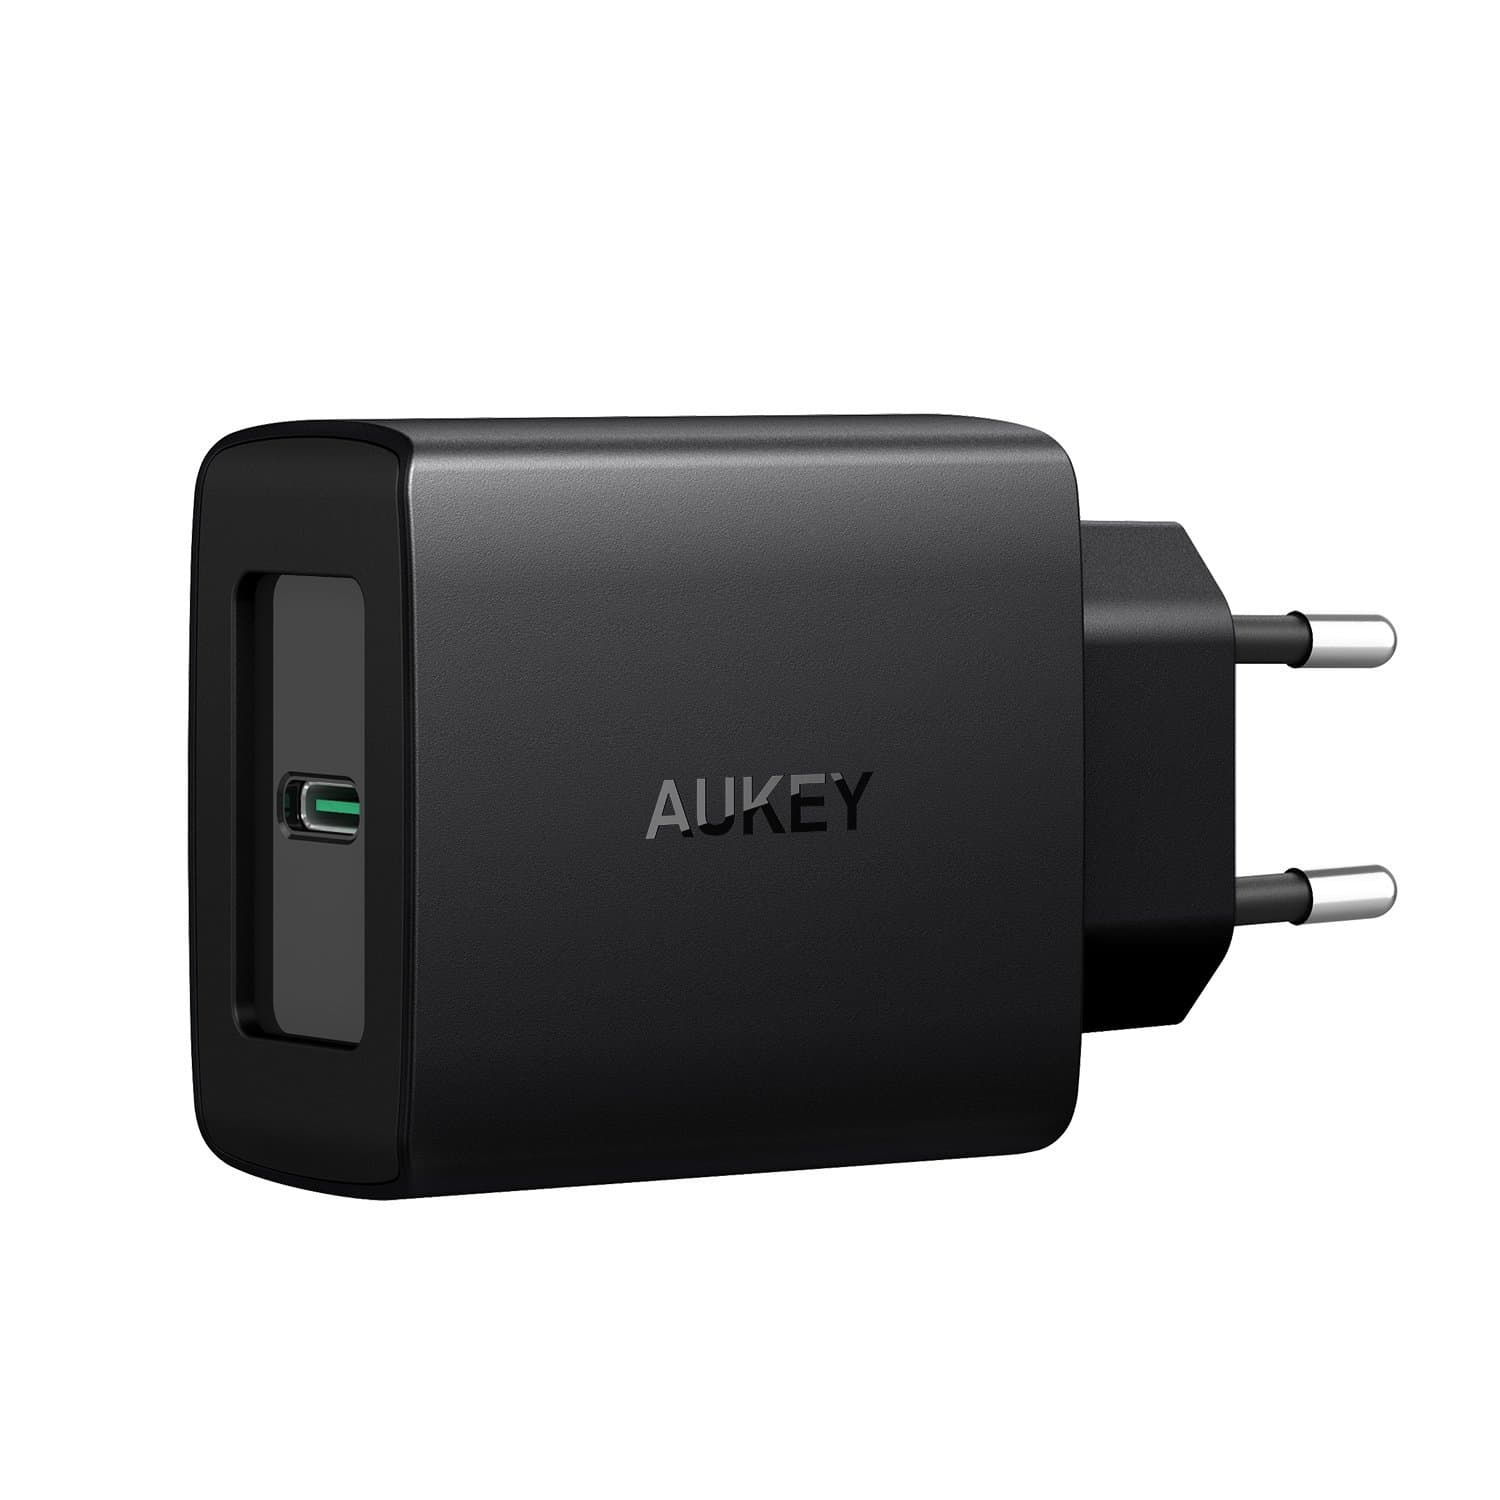 AUKEY PA-Y8 27W Qualcomm Quick Charge 4.0 with Power Delivery 3.0 Charger - EU Plug - Aukey Malaysia Official Store